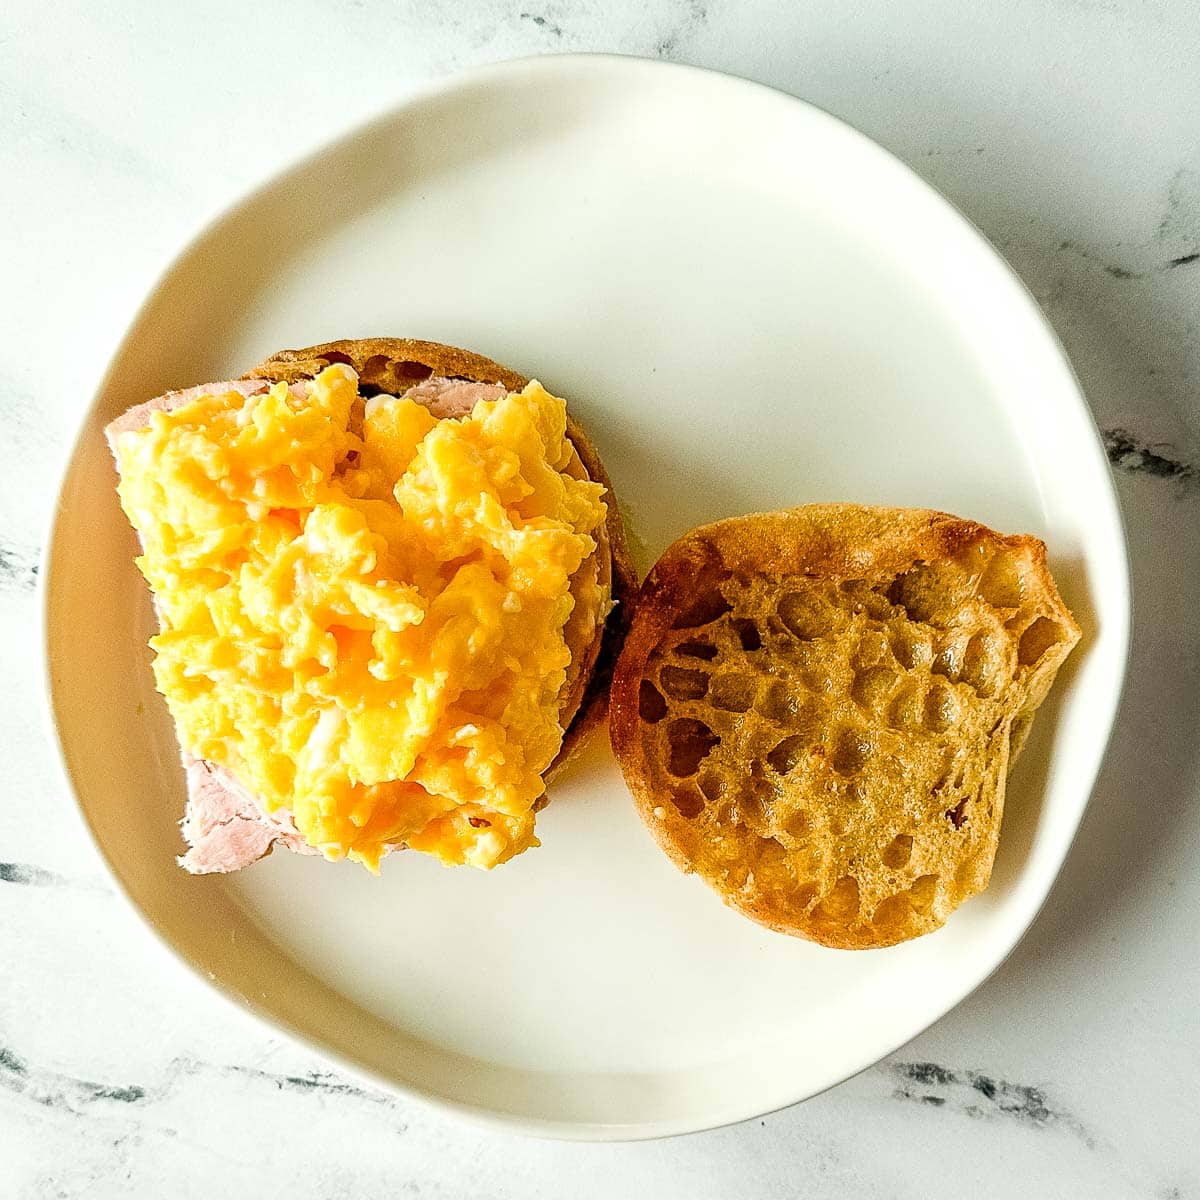 Toasted Englished muffin with turkey and scrambled eggs layered on top.